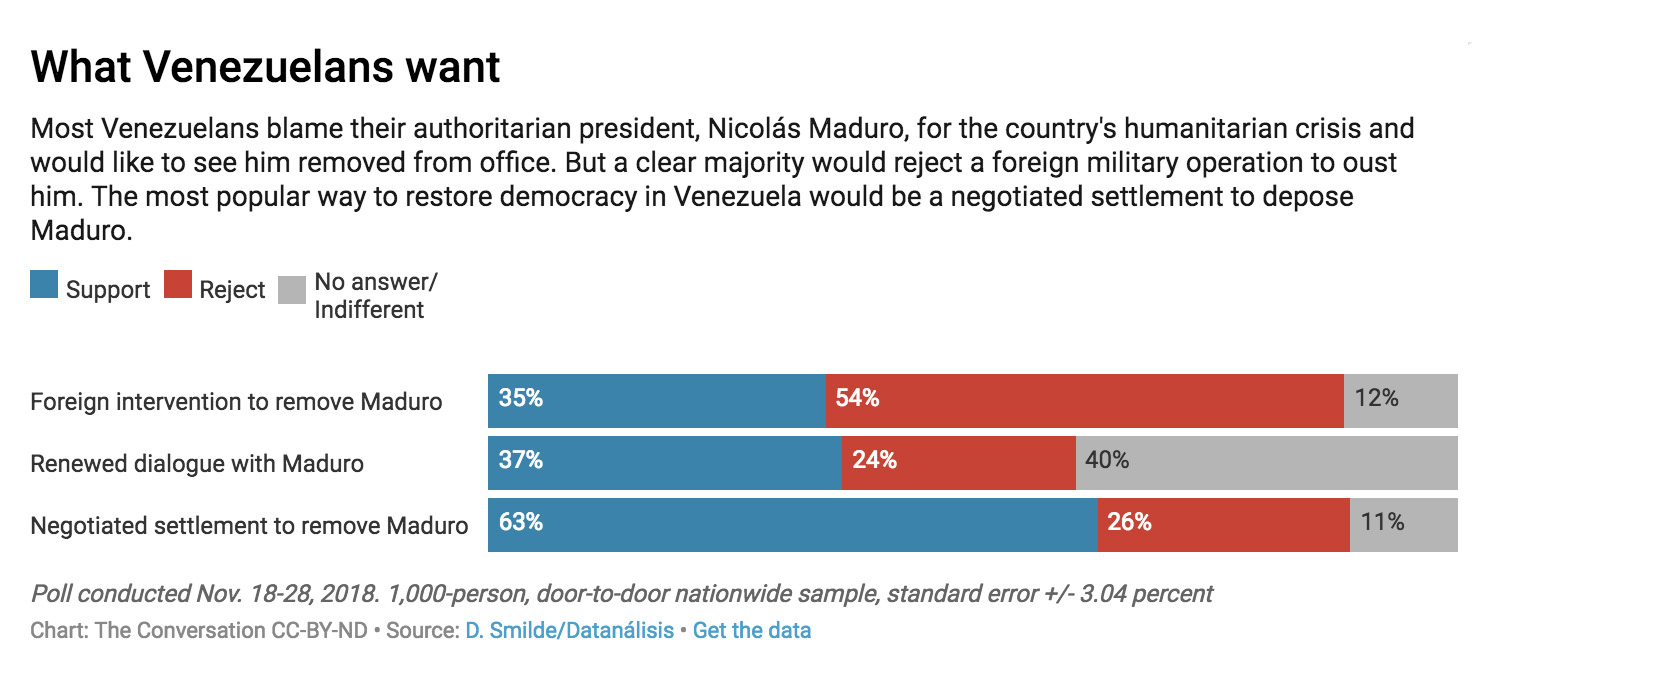 What Venezuelans want: Most Venezuelans blame their authoritarian president, Nicolás Maduro, for the country's humanitarian crisis and would like to see him removed from office. But a clear majority would reject a foreign military operation to oust him. The most popular way to restore democracy in Venezuela would be a negotiated settlement to depose Maduro.